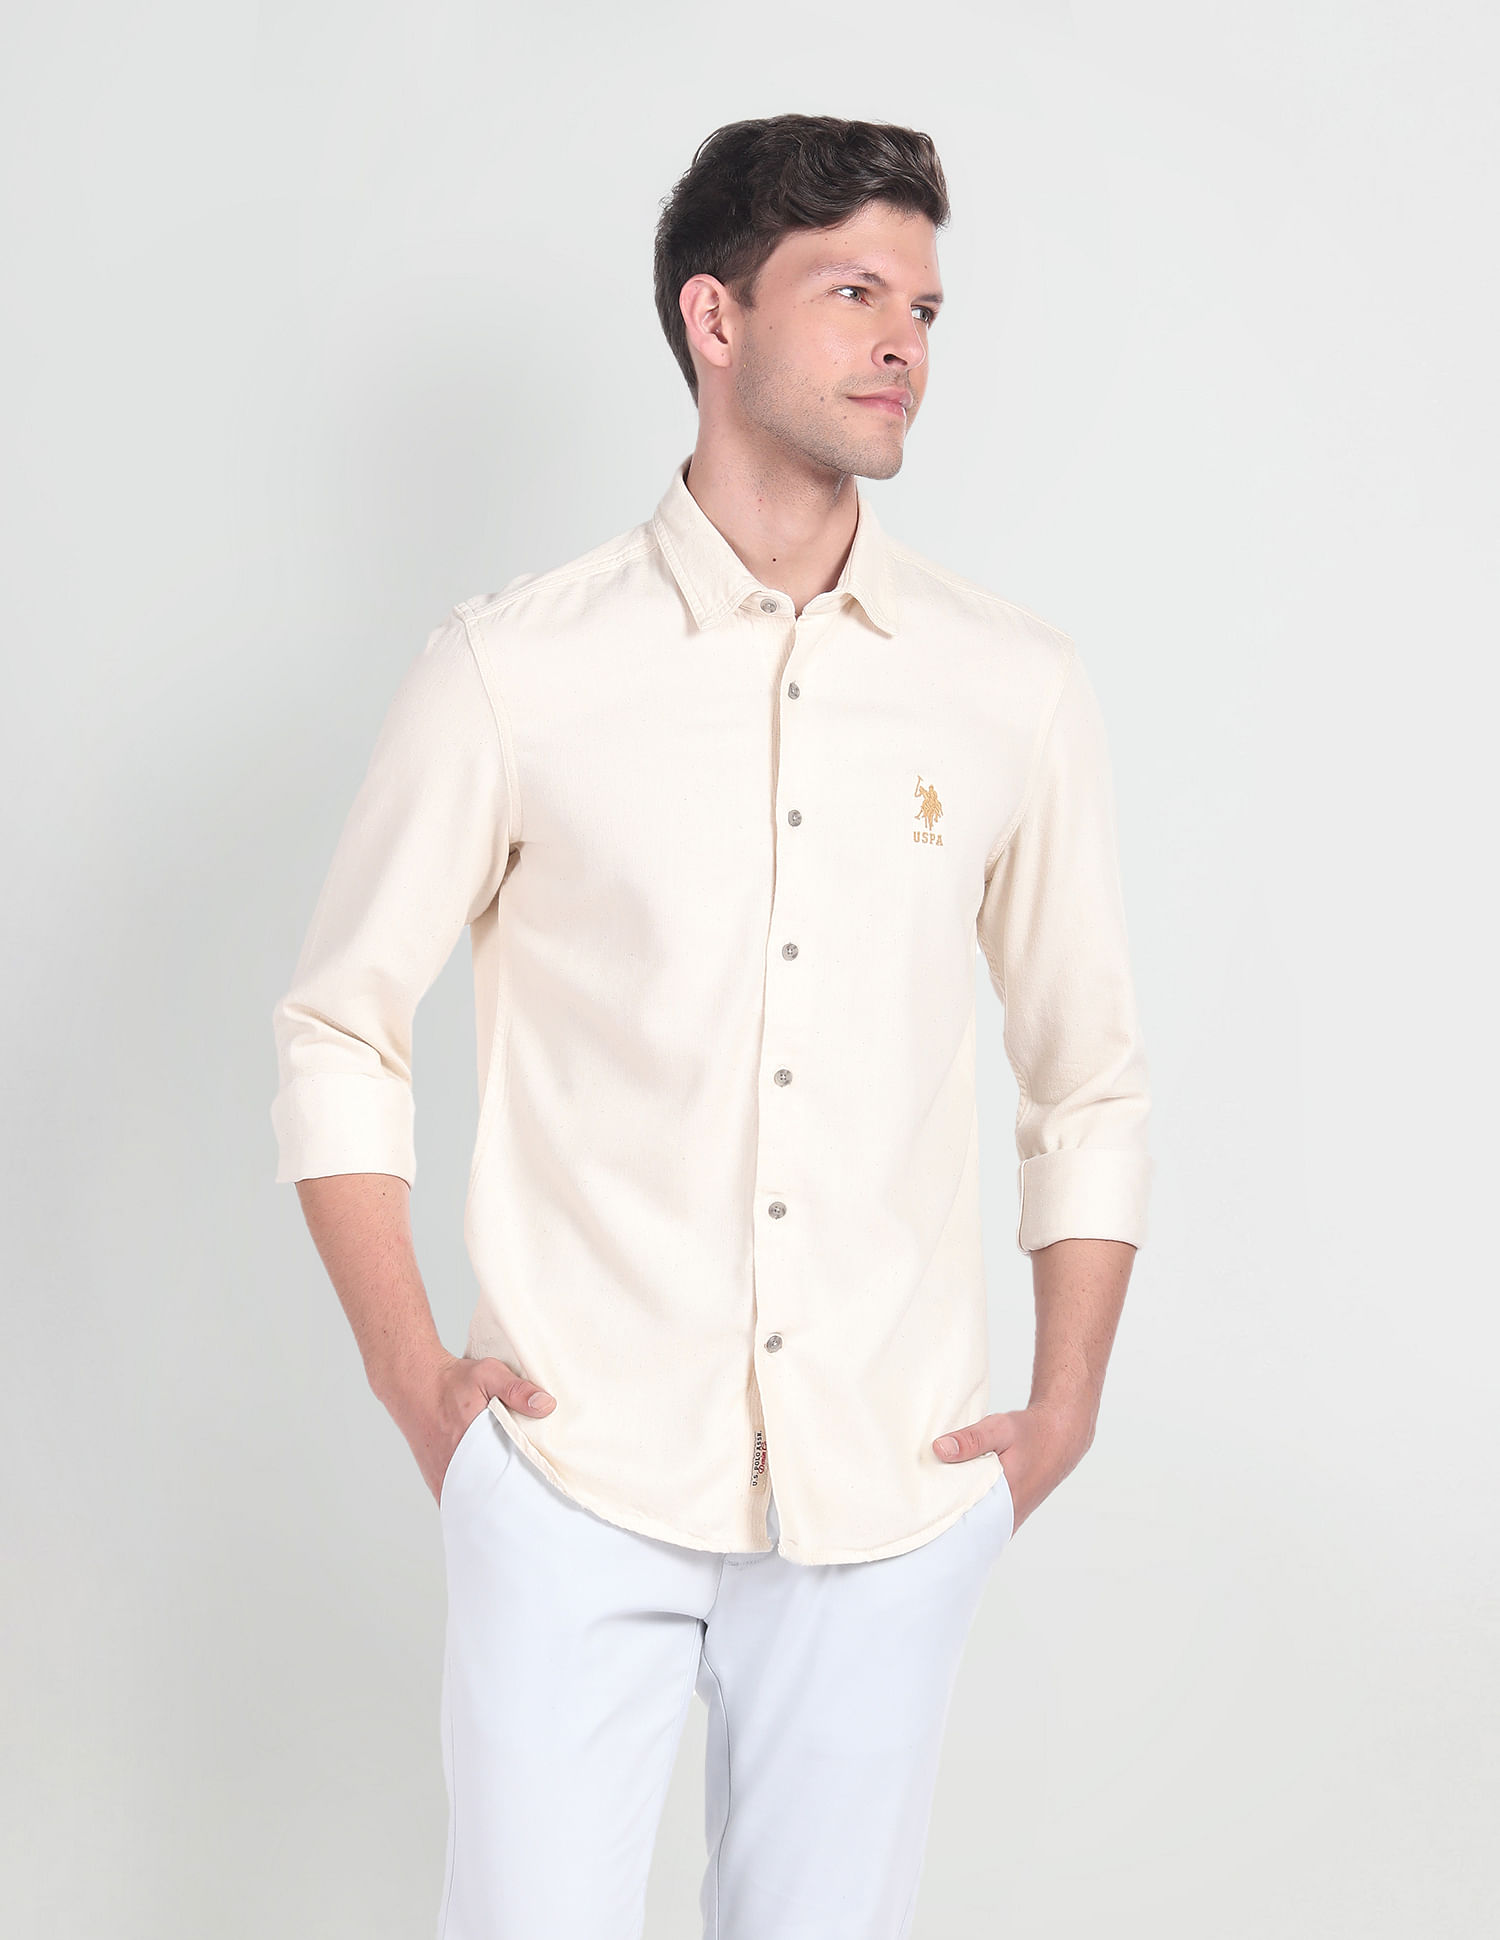 U.S. Polo Assn. Denim Co. Men Printed Casual White Shirt - Buy U.S. Polo  Assn. Denim Co. Men Printed Casual White Shirt Online at Best Prices in  India | Flipkart.com